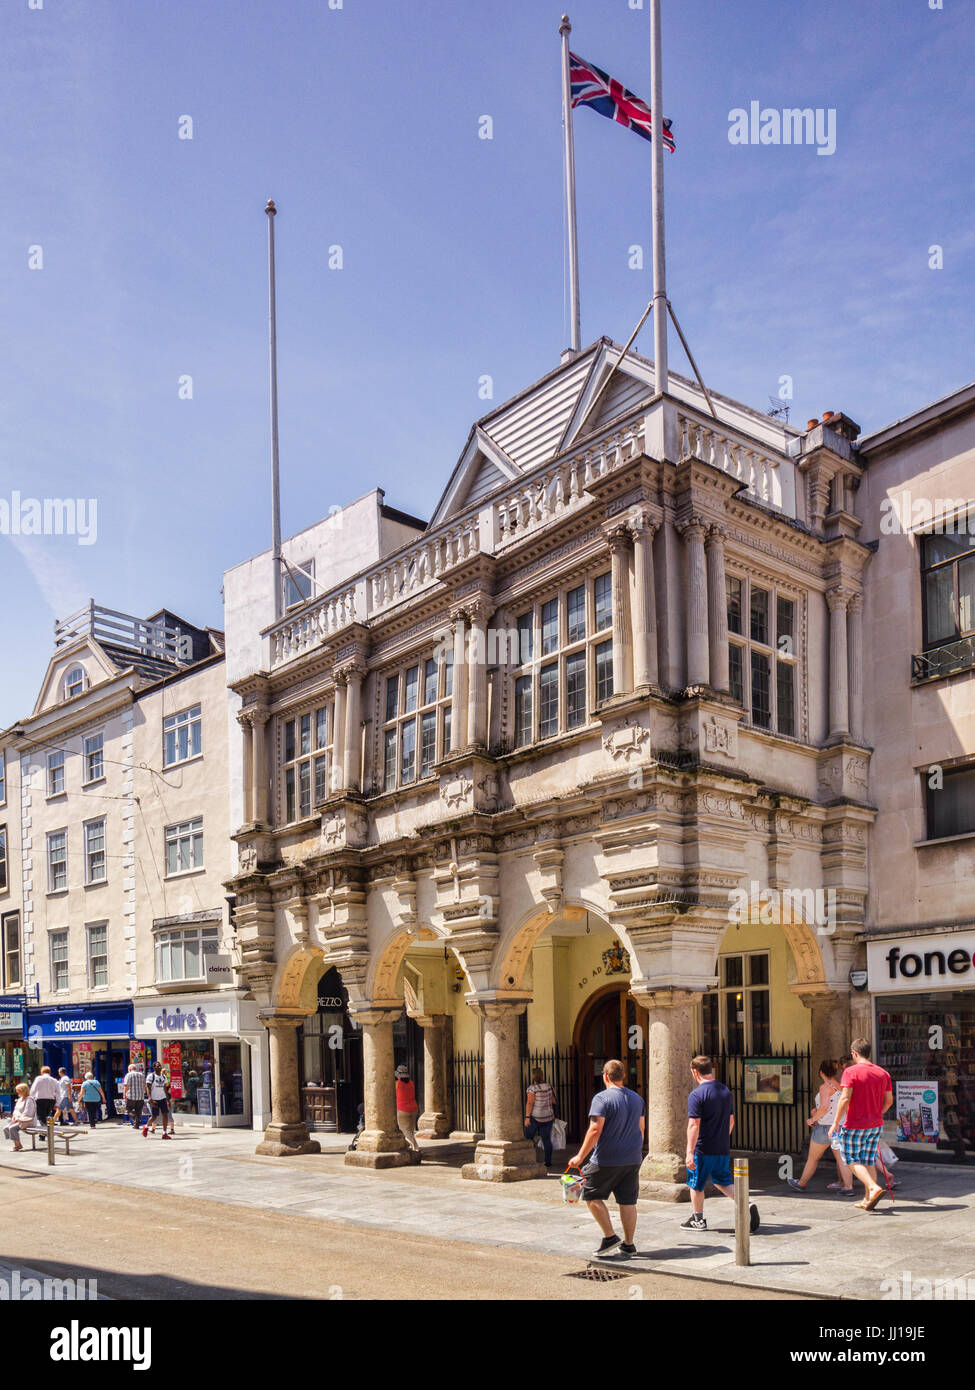 21 June 2017: Exeter, Devon, England, UK - The Guildhall in High Street, Exeter. Stock Photo